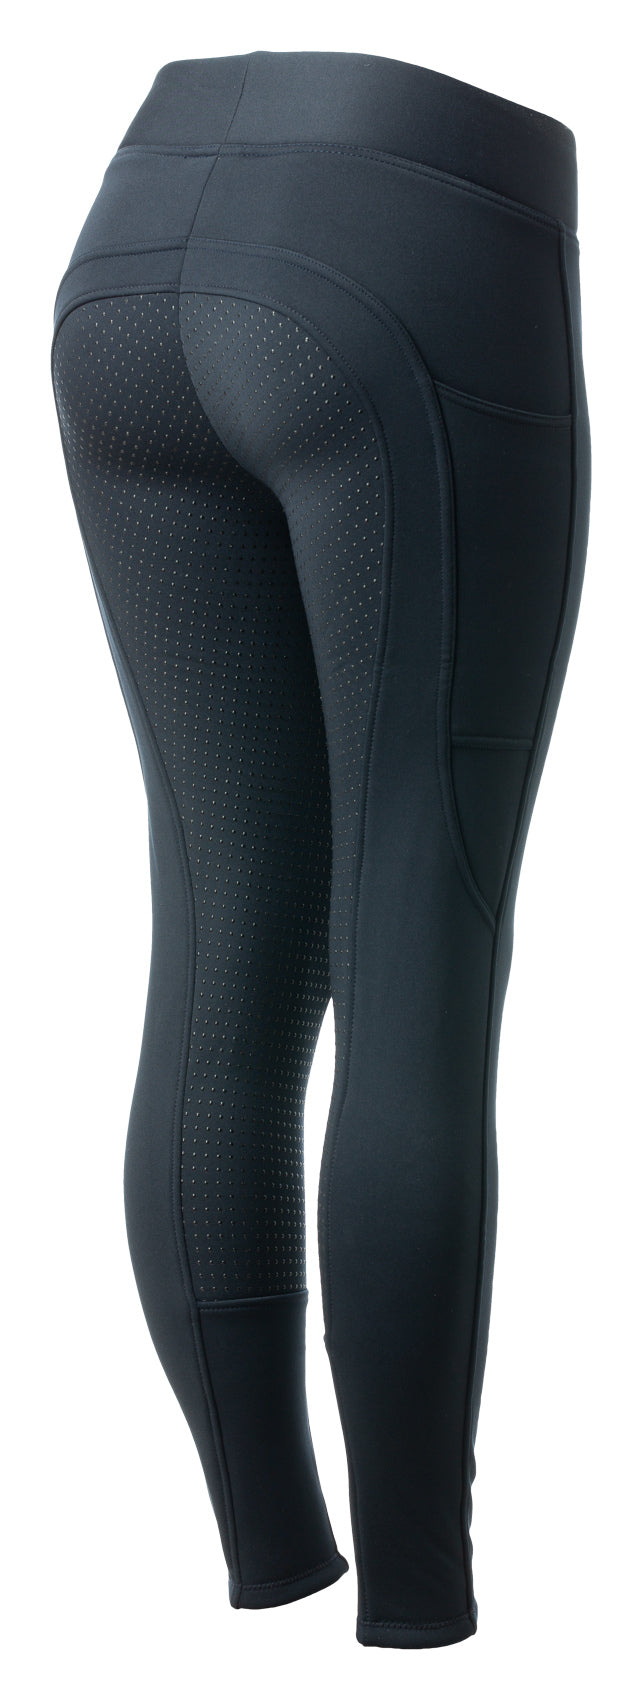 Horze Women's Silicone Full Seat Riding Tights with Phone Pocket